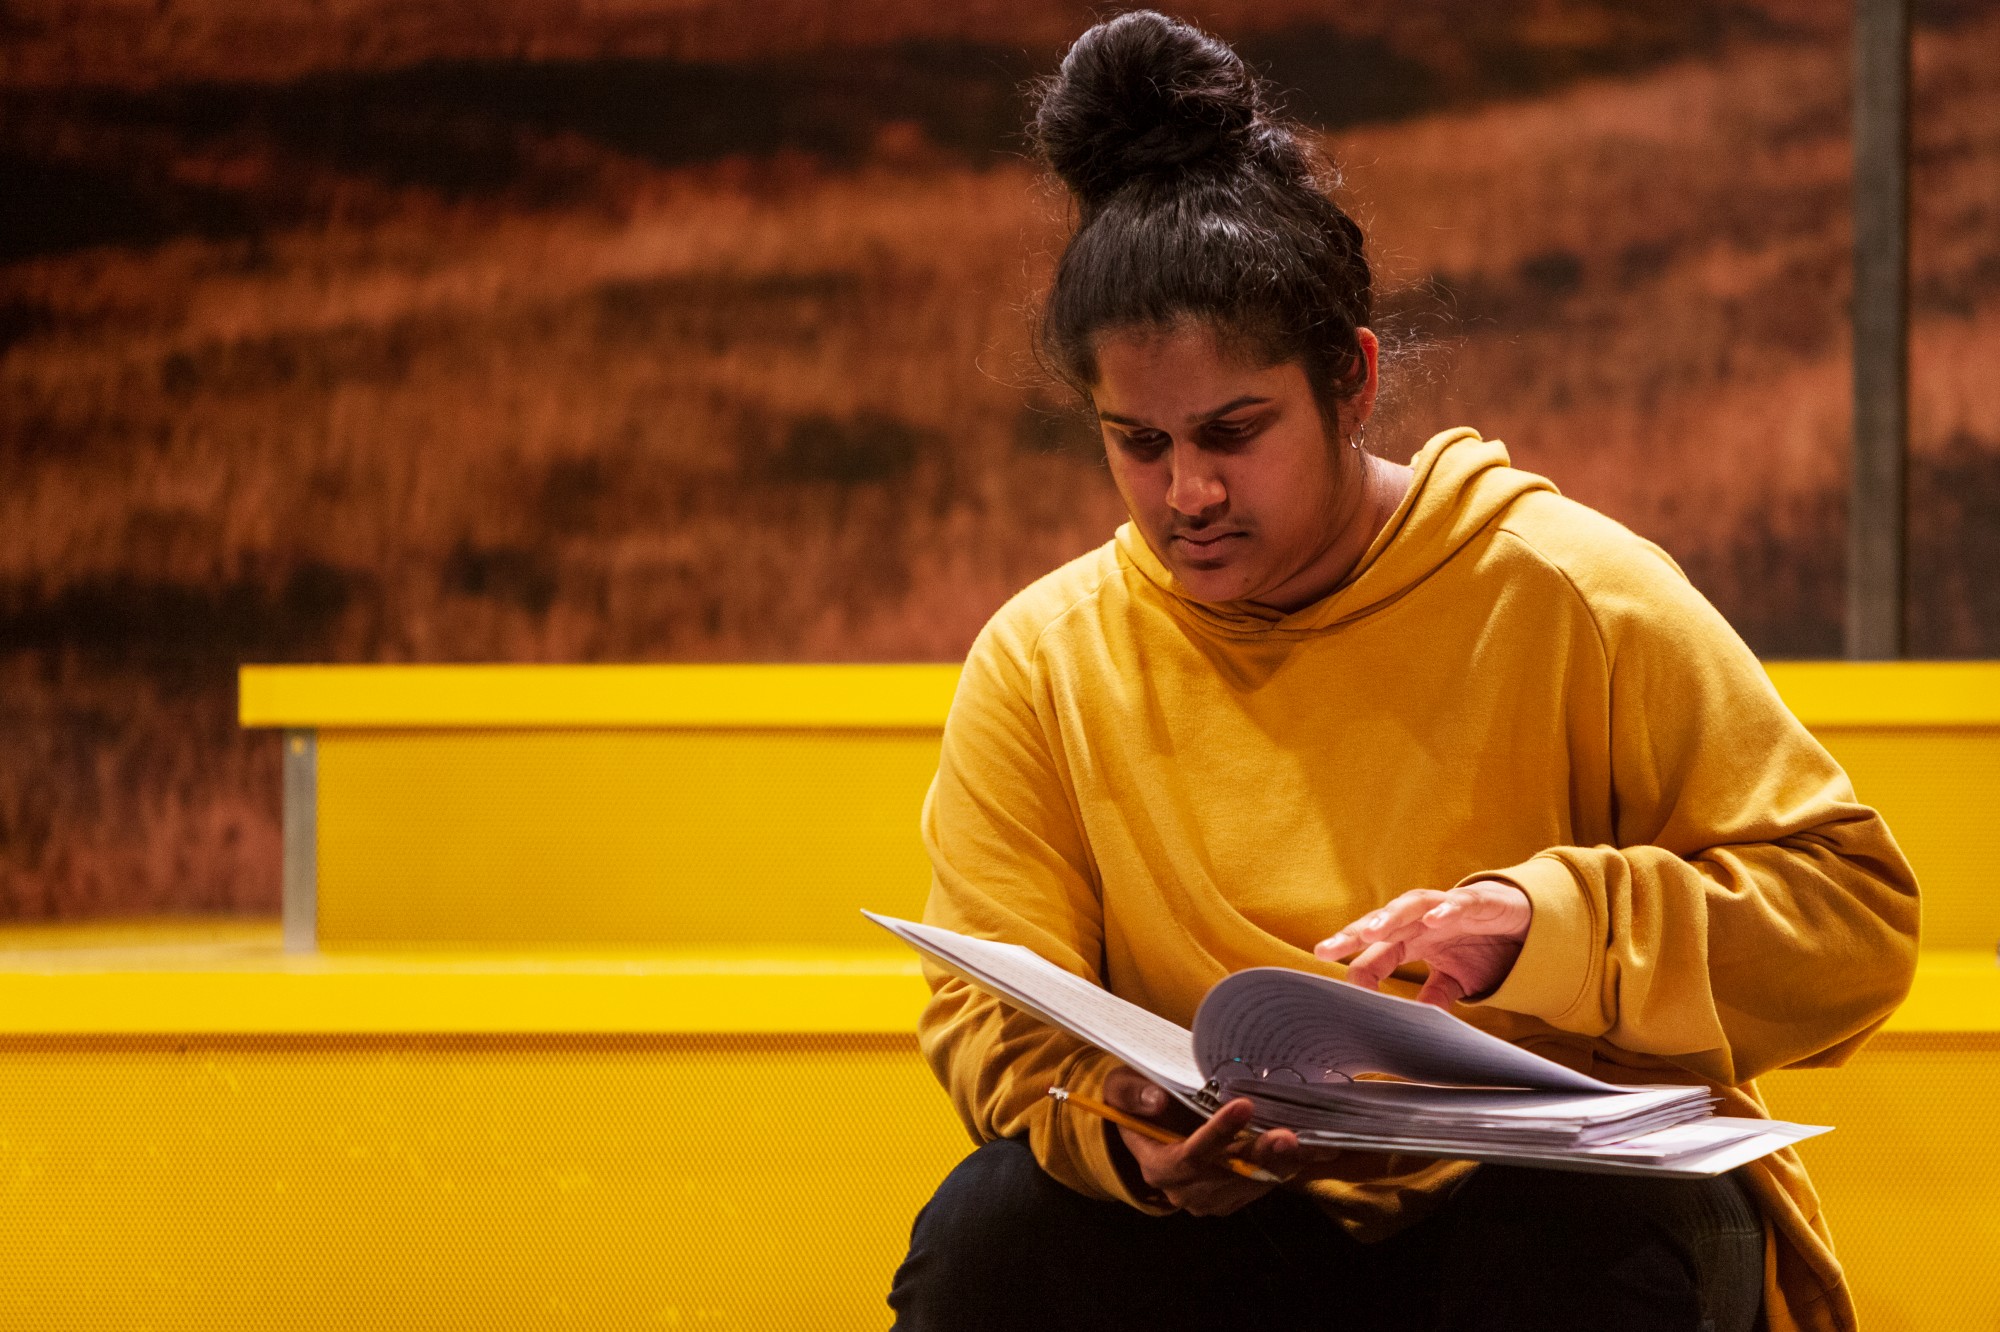 Actress Sushma Saha flips through her notes during a rehearsal of Interstate at MixedBlood Theatre on Tuesday, Feb. 18. The production, created by Kit Yan and Melissa Li, follows the experiences of two trans people, navigating a myriad of cultural issues.